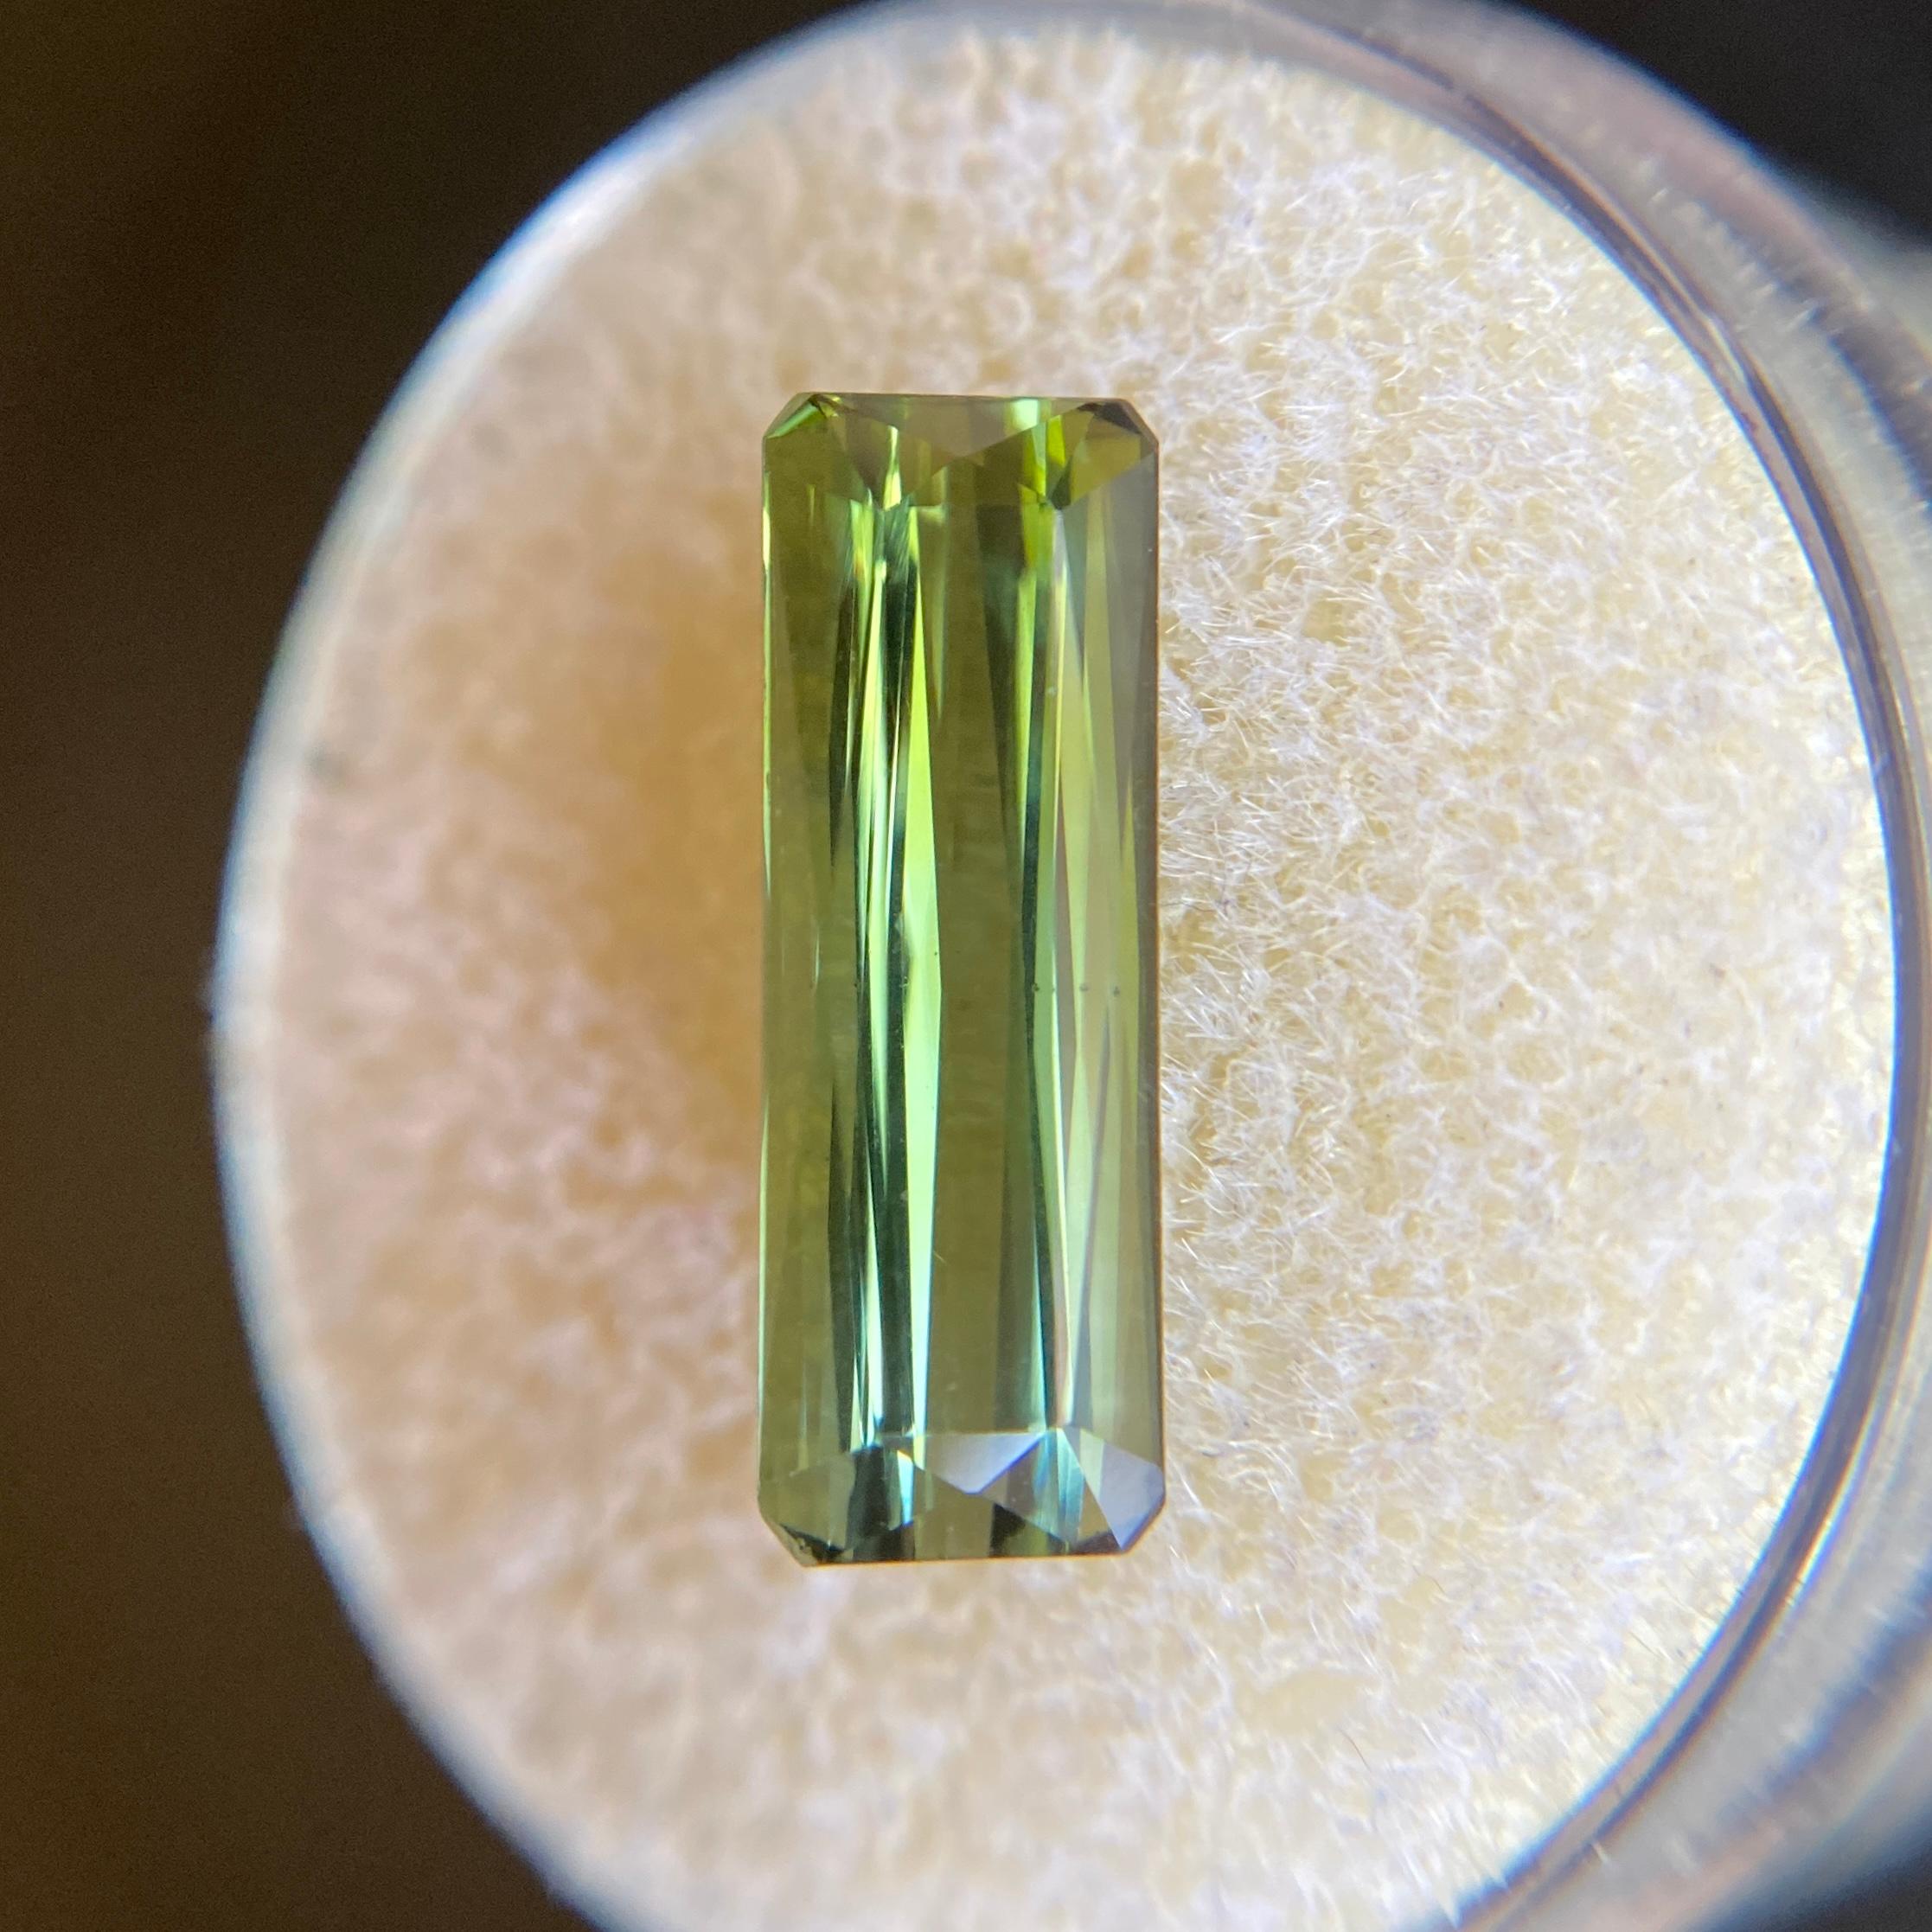 Natural Yellowish Green Tourmaline Gemstone.

3.39 Carat with a beautiful bright yellowish green colour and very good clarity. Clean stone with only some small natural inclusions visible when looking closely.

Also has an excellent emerald/octagon